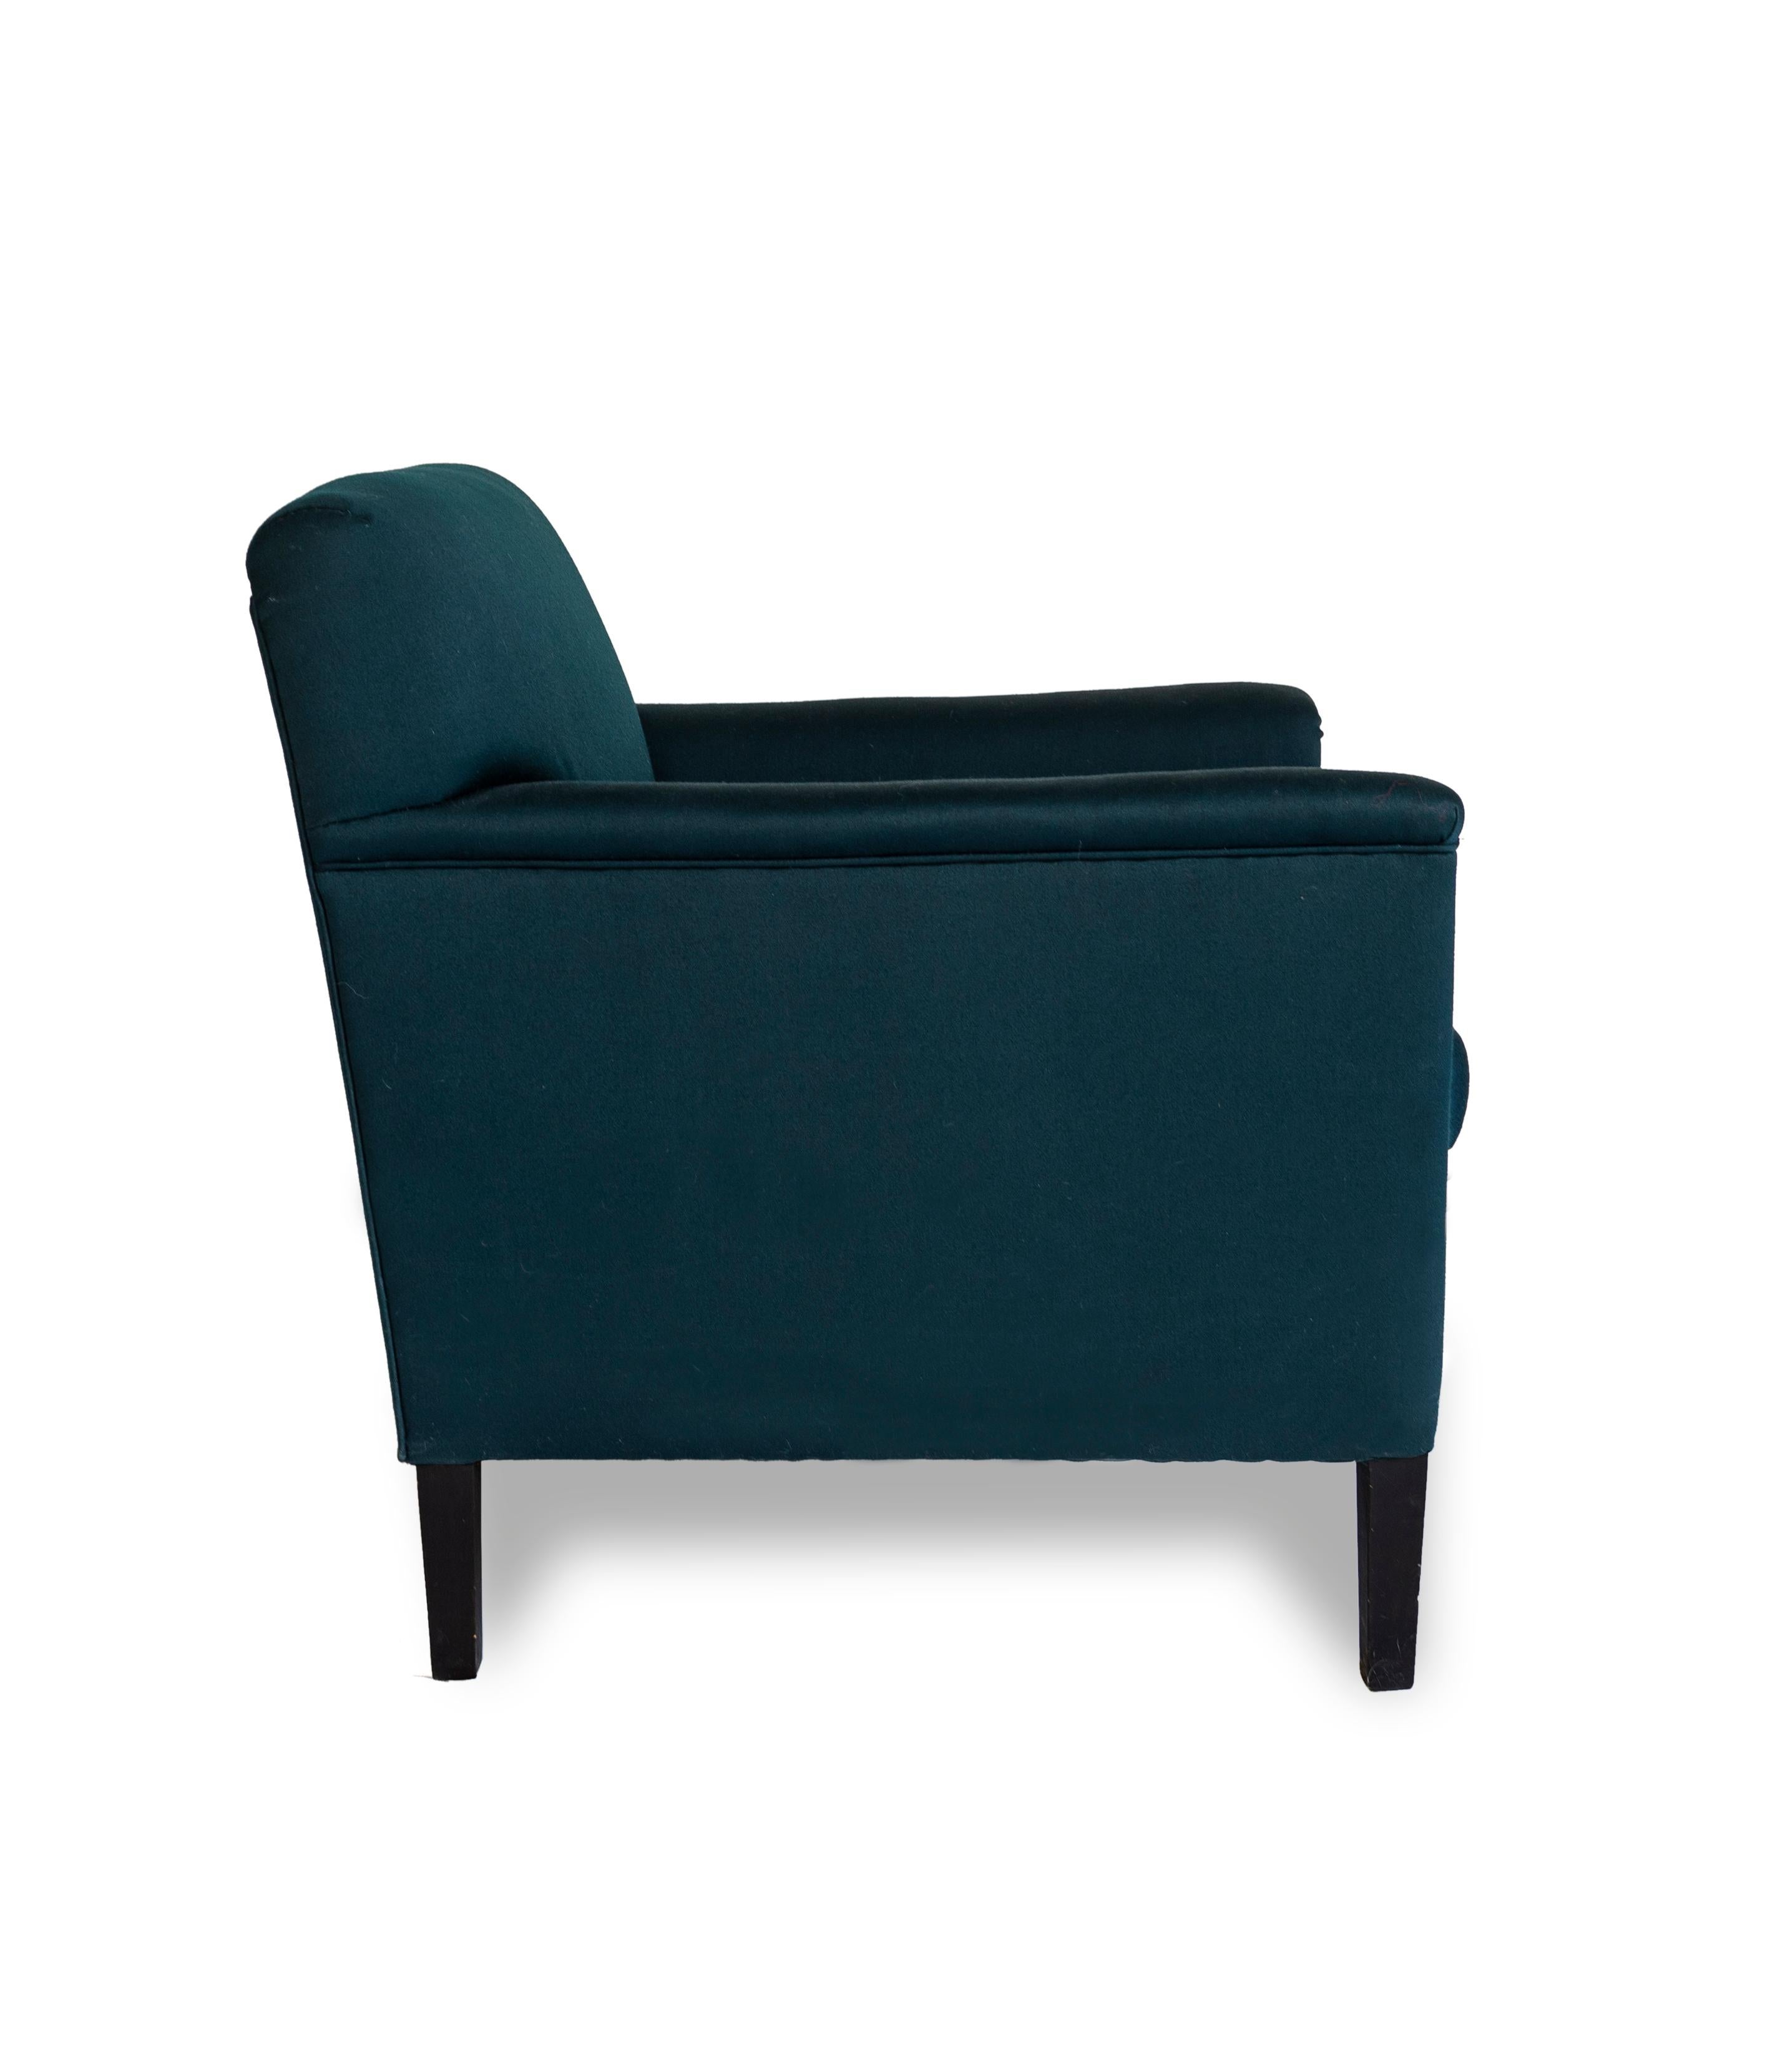 Herbert Upholstered Chair in Wool, Vica designed by Annabelle Selldorf 1